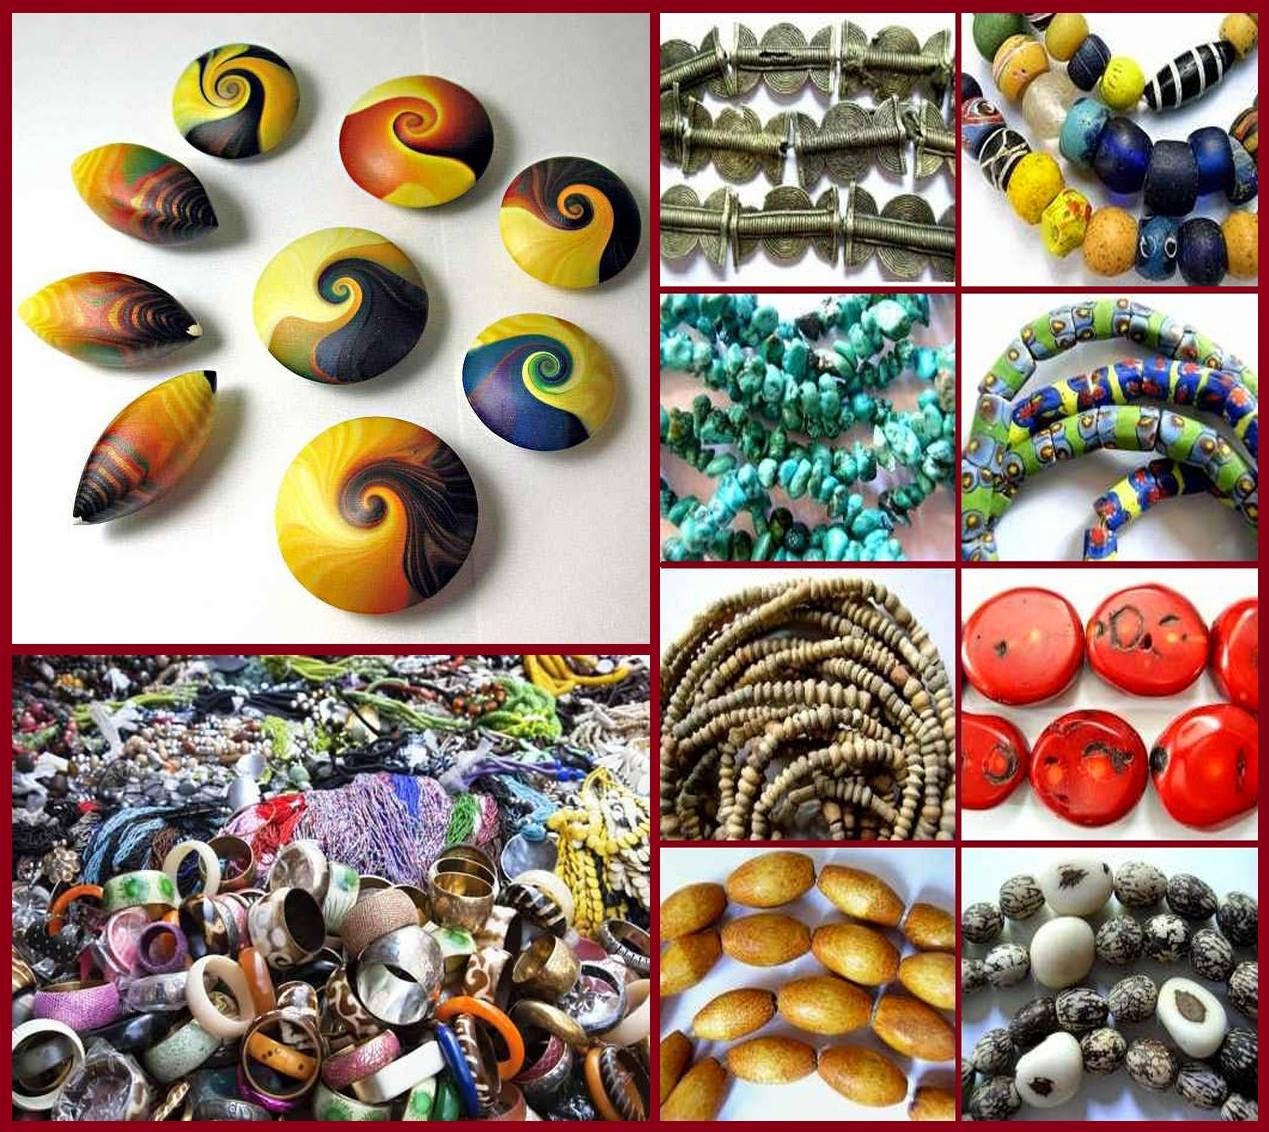 Selling Beads | Business Ideas